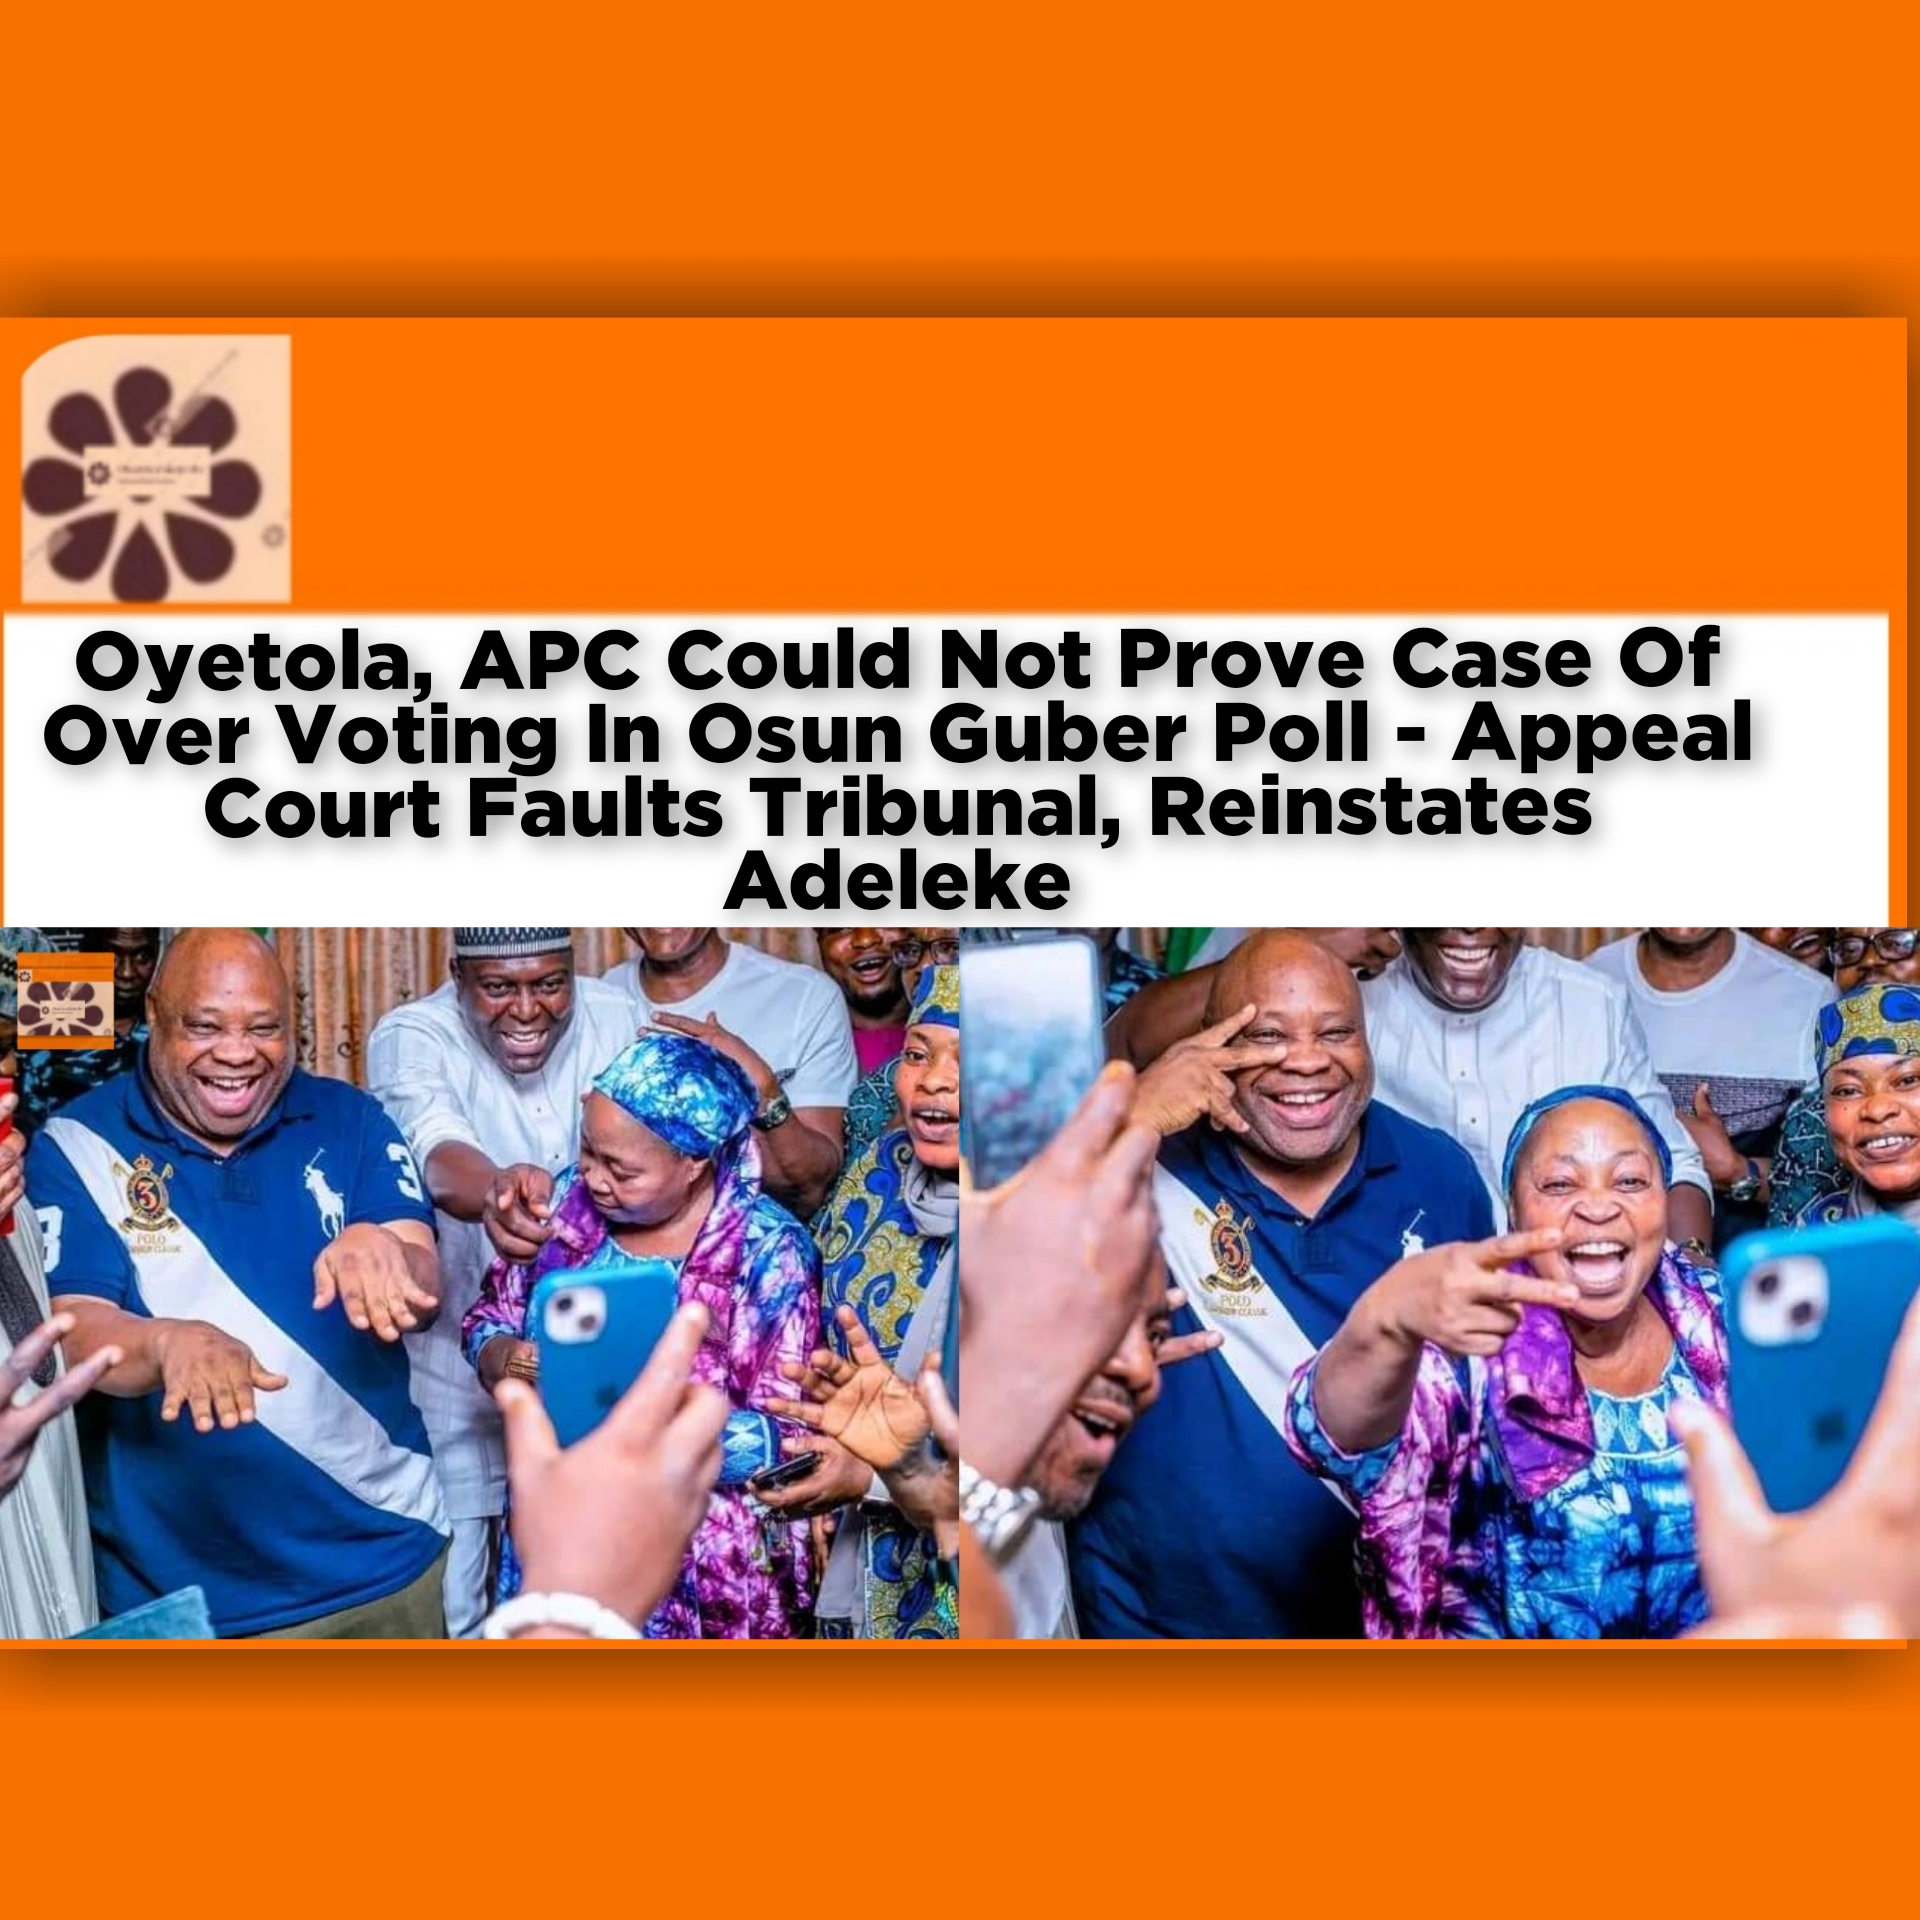 Oyetola, APC Could Not Prove Case Of Over Voting In Osun Guber Poll - Appeal Court Faults Tribunal, Reinstates Adeleke ~ OsazuwaAkonedo Nigerian Army